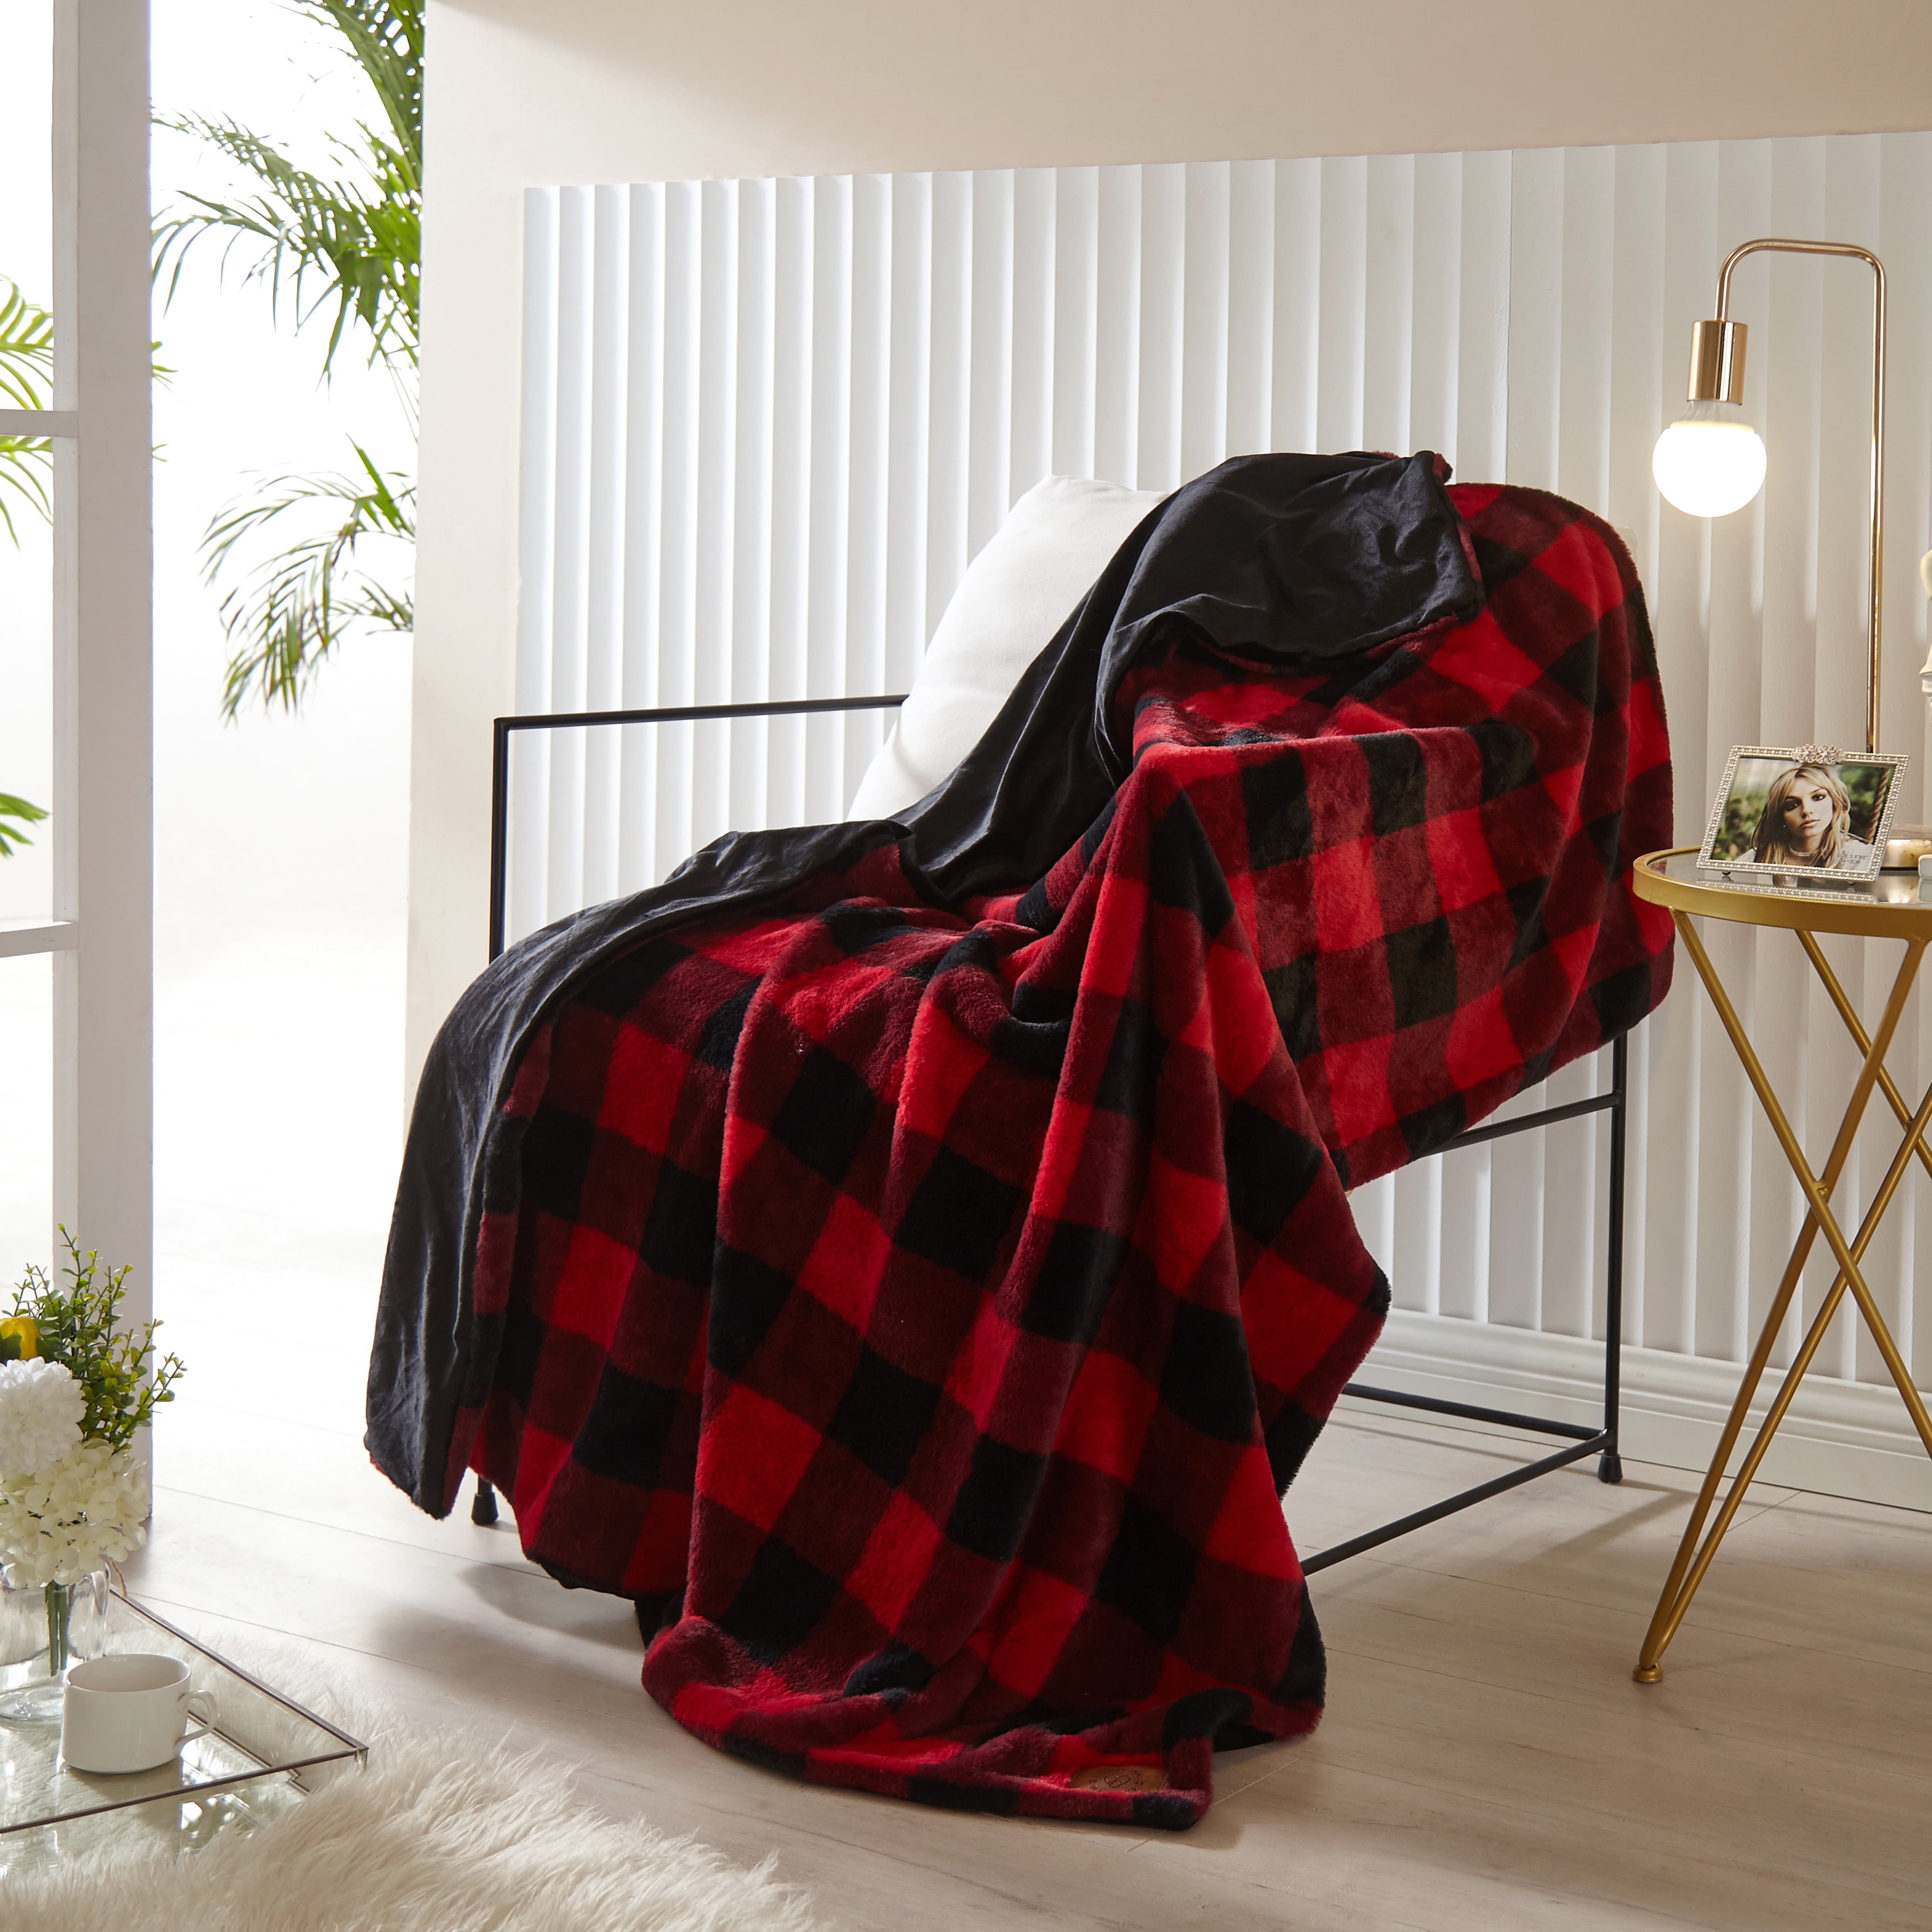 Dearfoams 50"x60" Throw Blankets: Red Buffalo Checkered Micromink $6.71, Aztec Reverse Sherpa $7.51, Ivory Sweater Knit $9.53 & More + Free Shipping w/ Walmart+ or Free Pickup